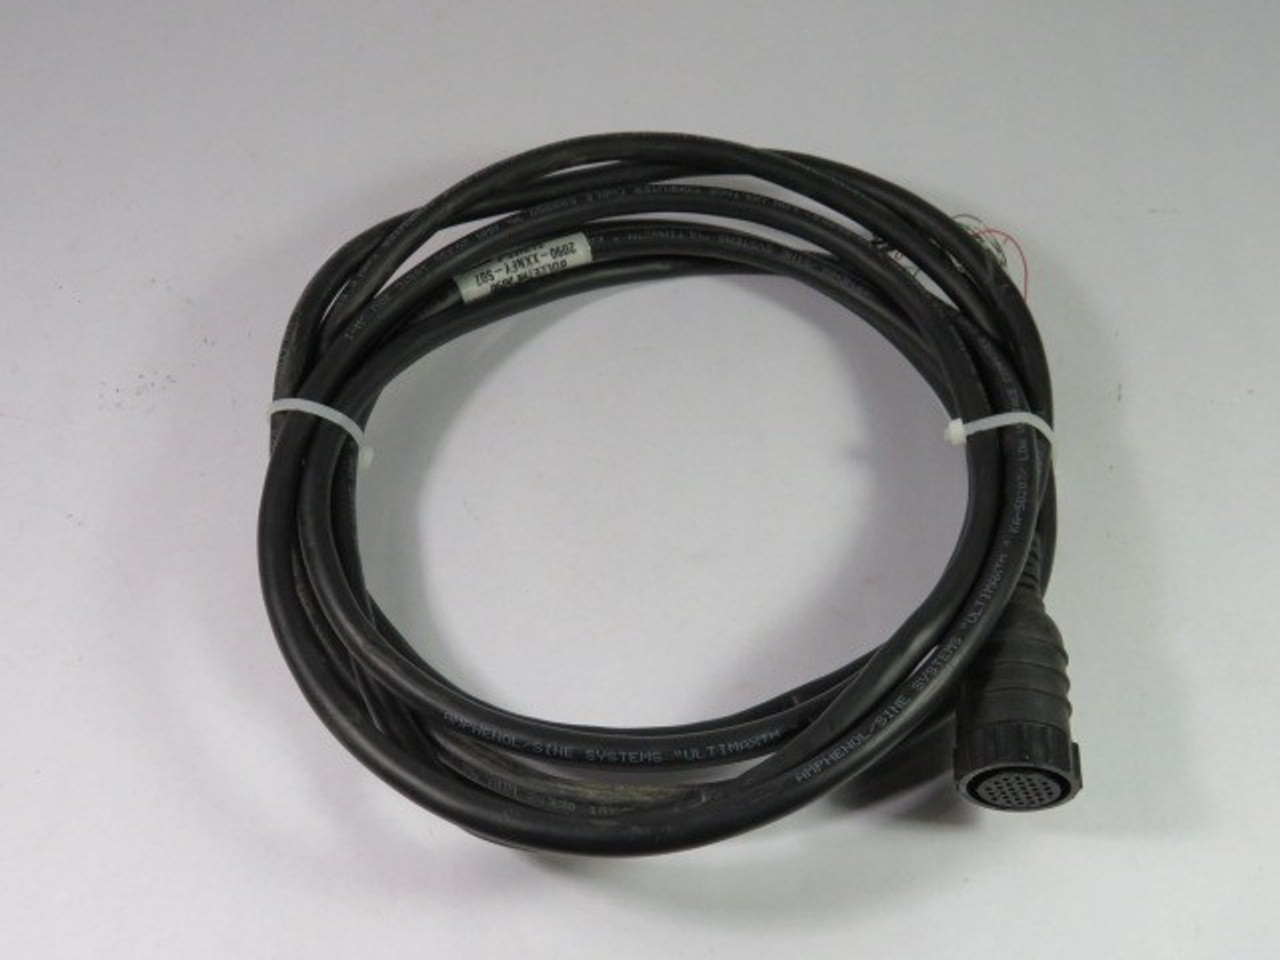 Allen-Bradley 2090-XXNFY-S07 Cable 11'6" AS IS